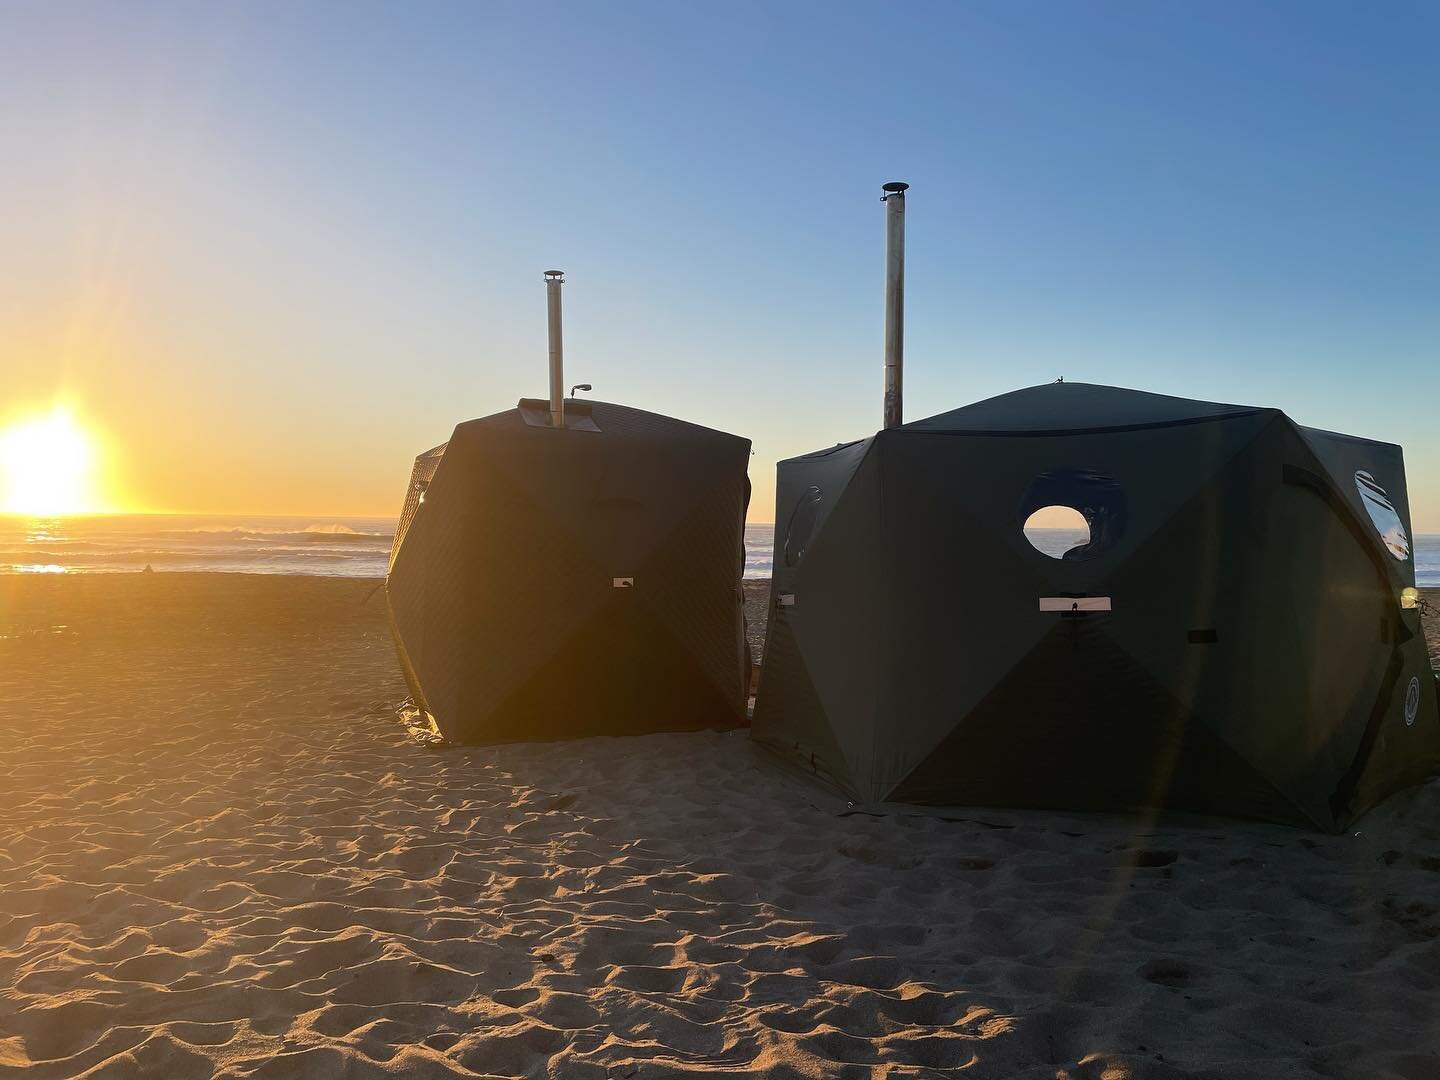 Our two new tents got to keep people cozy at the Kelp Classic invitational surf competition today.  A beautiful day on the coast just got more lovely. inquire about rentals at info@mendosauna.com